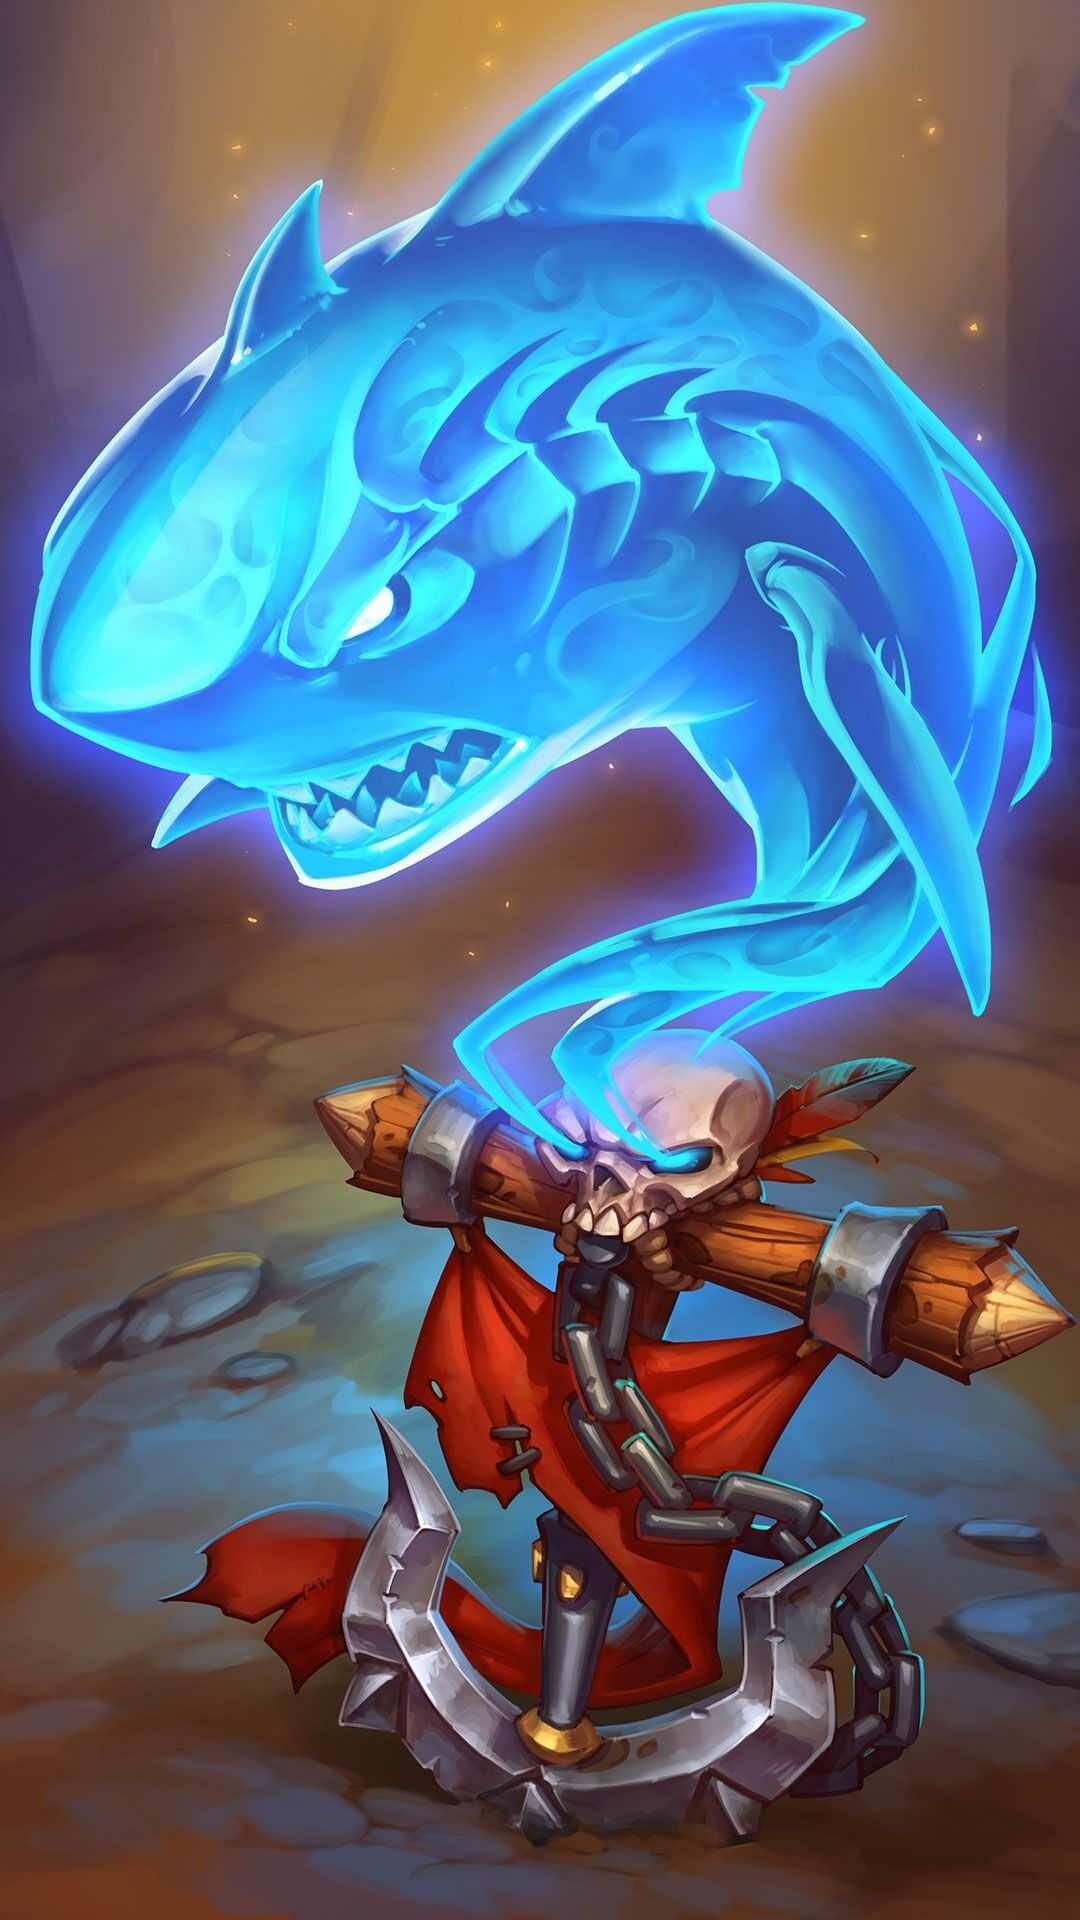 Awesome wallpapers, Stunning visuals, Captivating artwork, Hearthstone fandom, 1080x1920 Full HD Phone